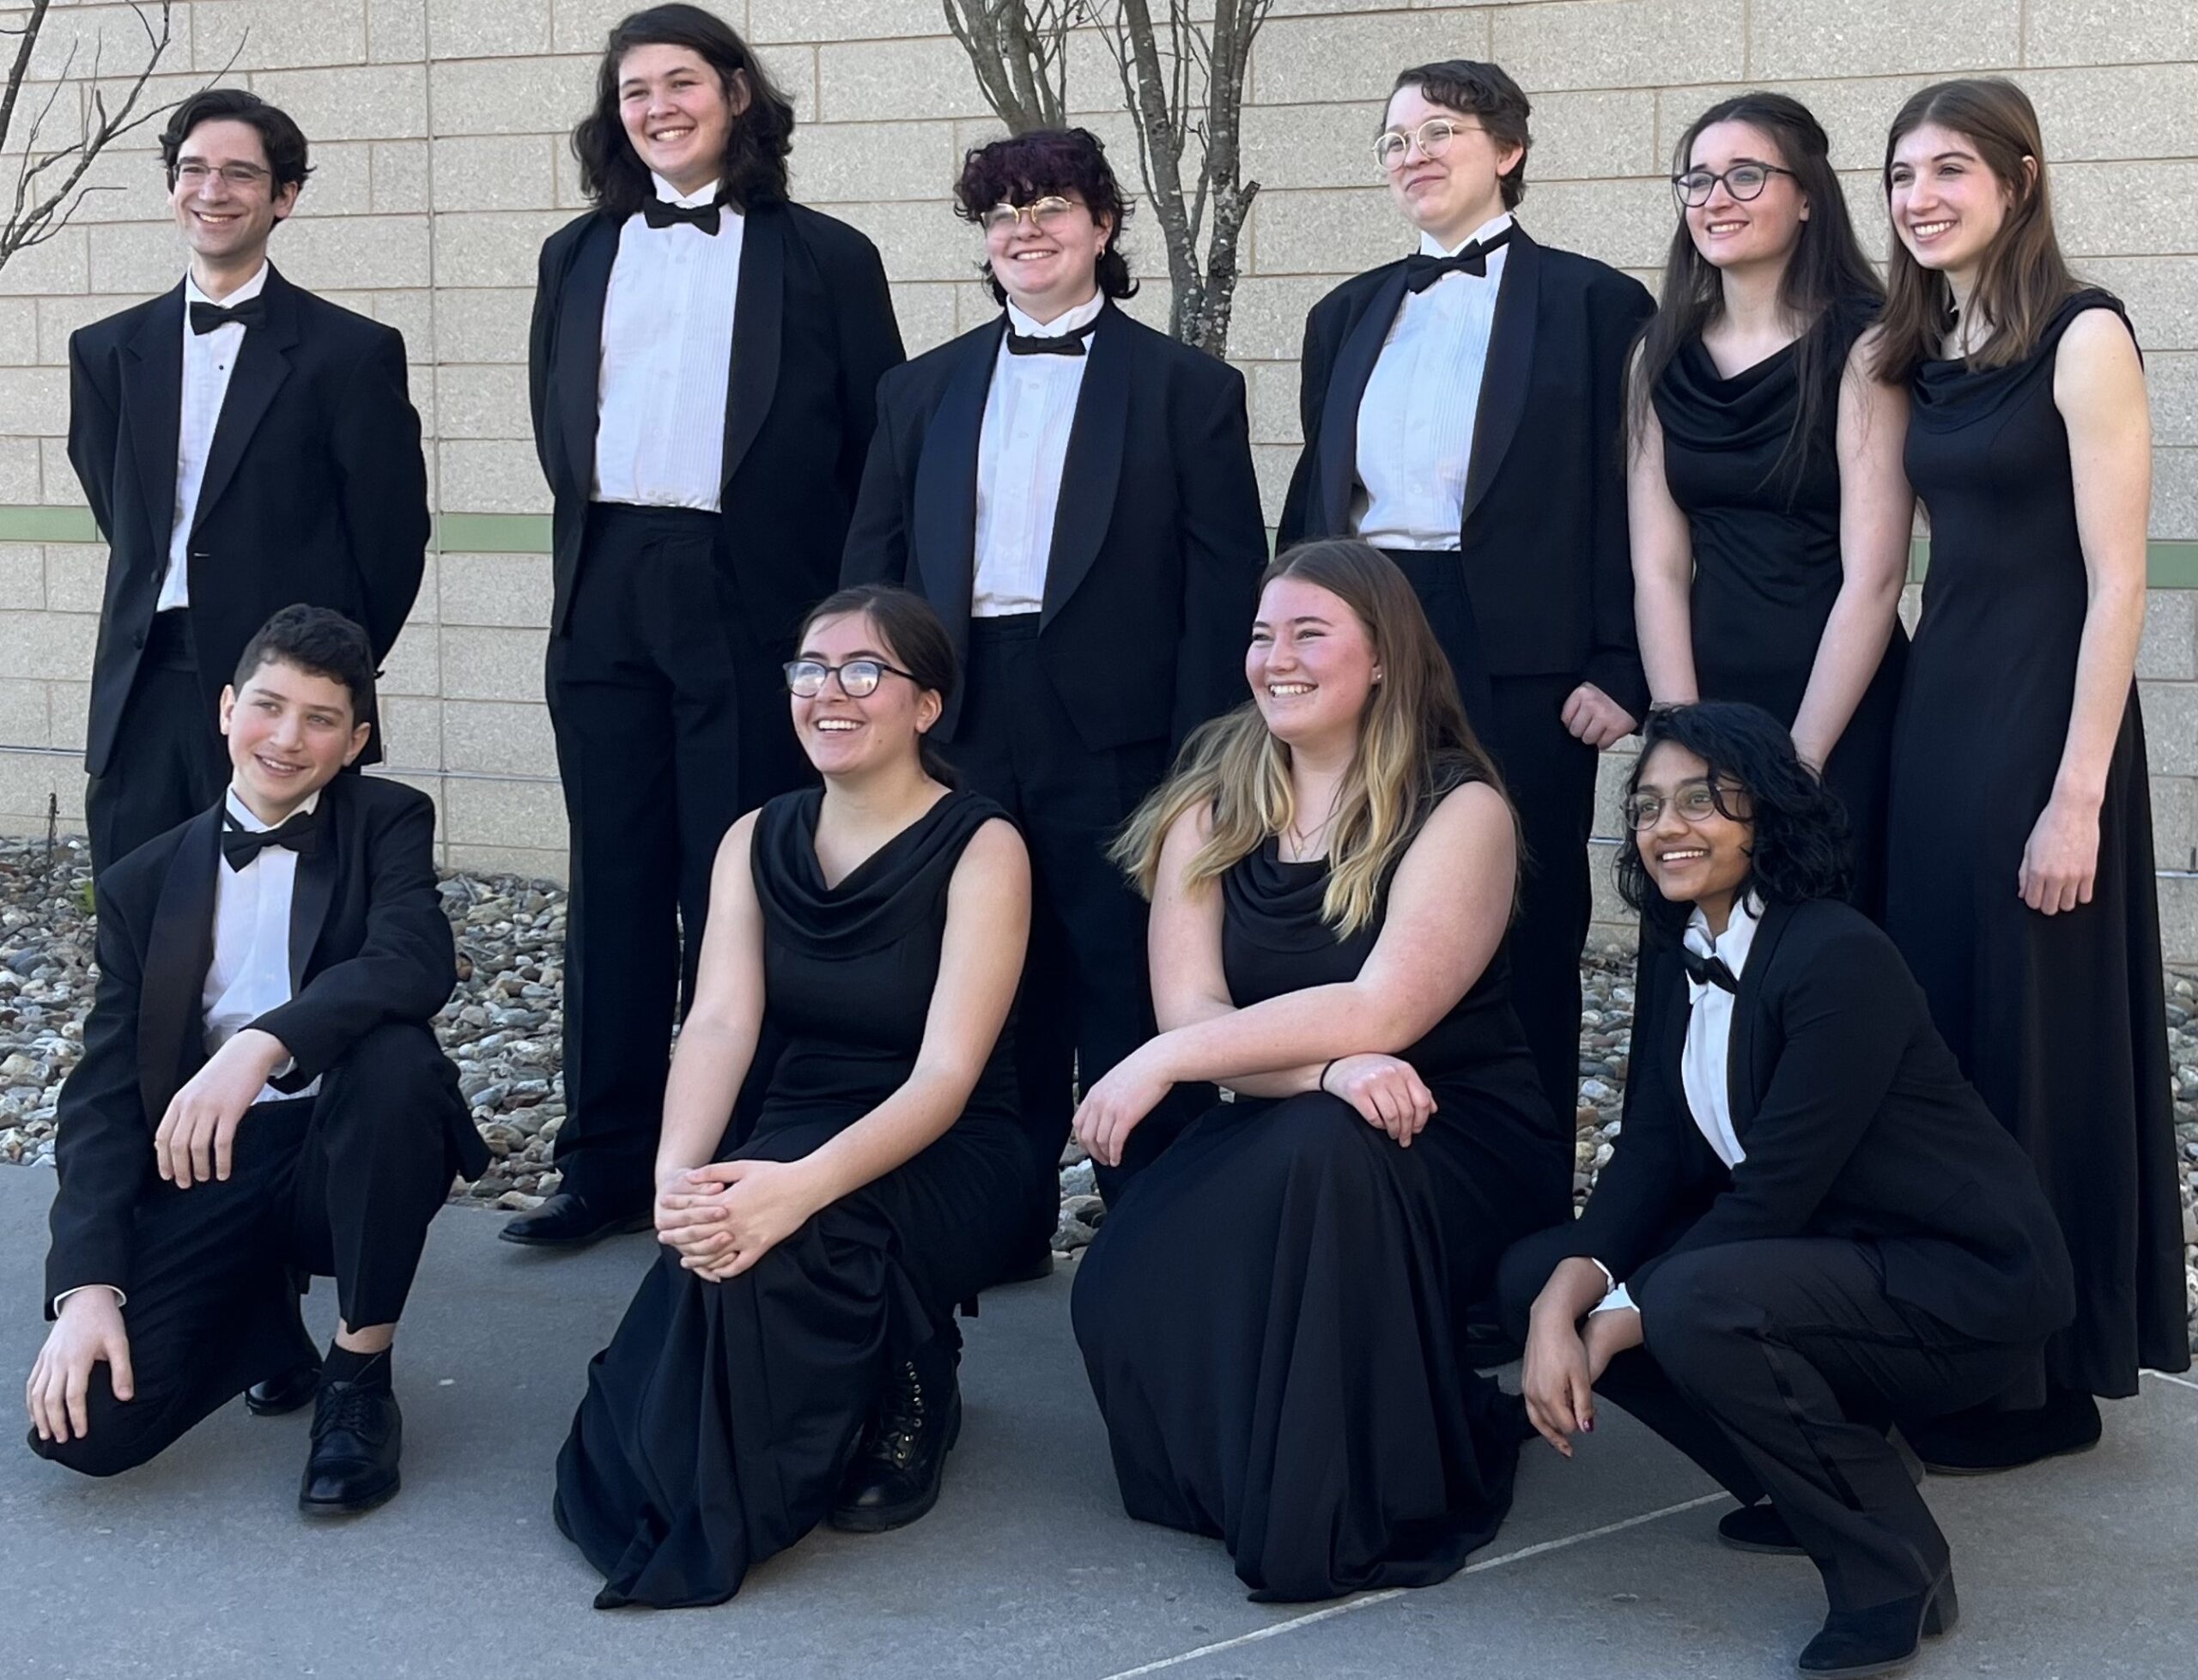 Local student musicians earn awards at MICCA festivals